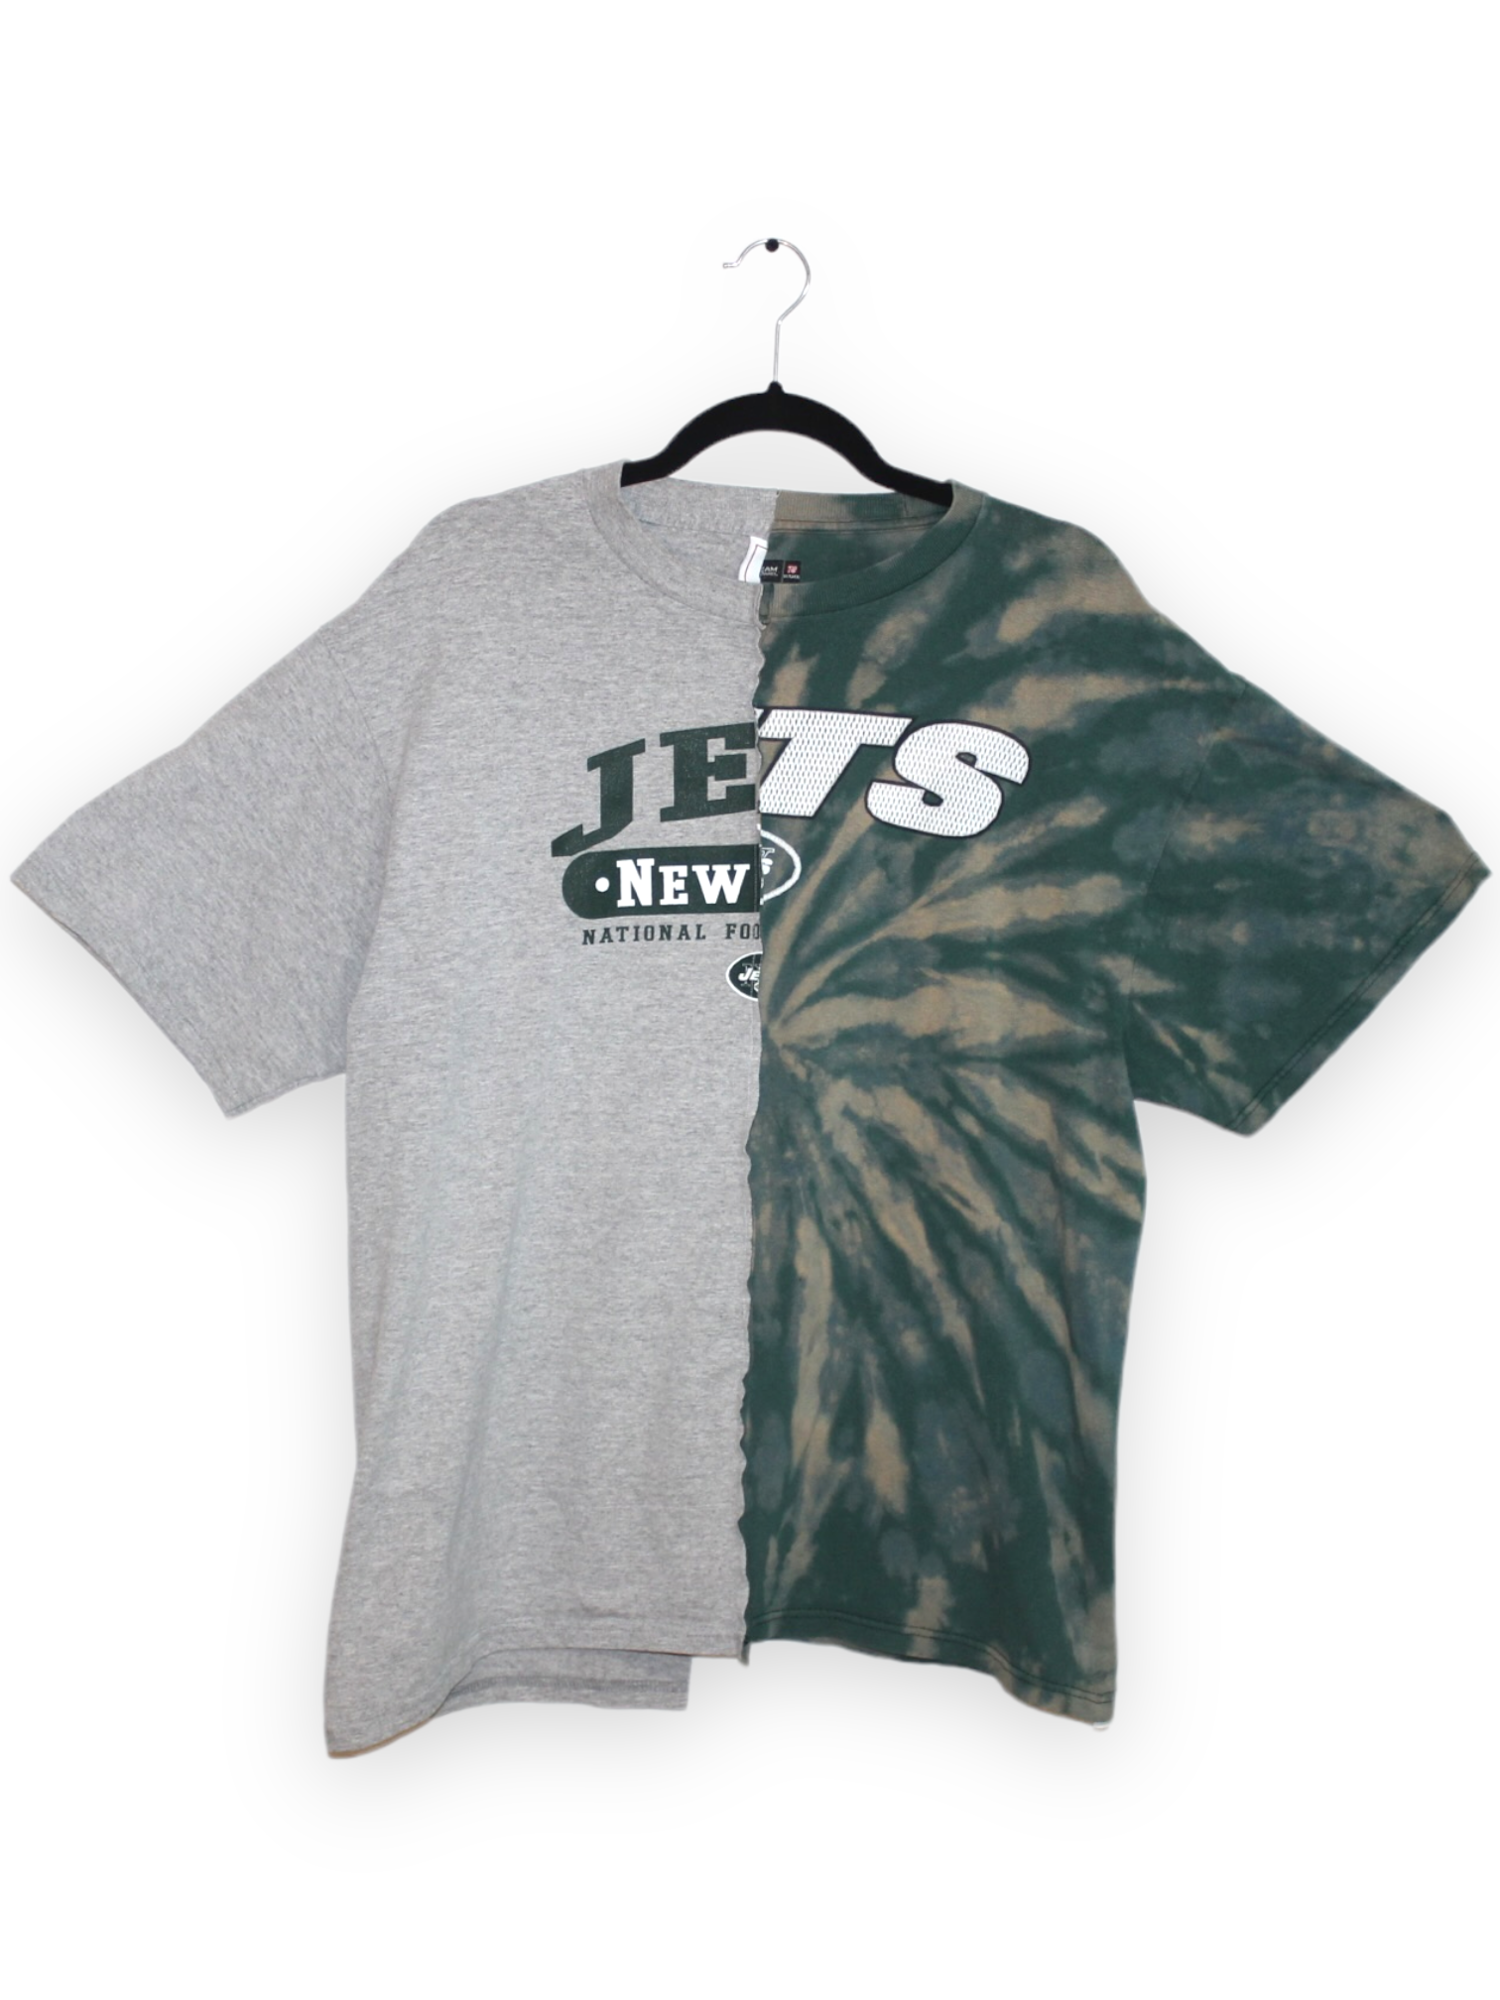 NY Jets Split Tee — Revamped For You